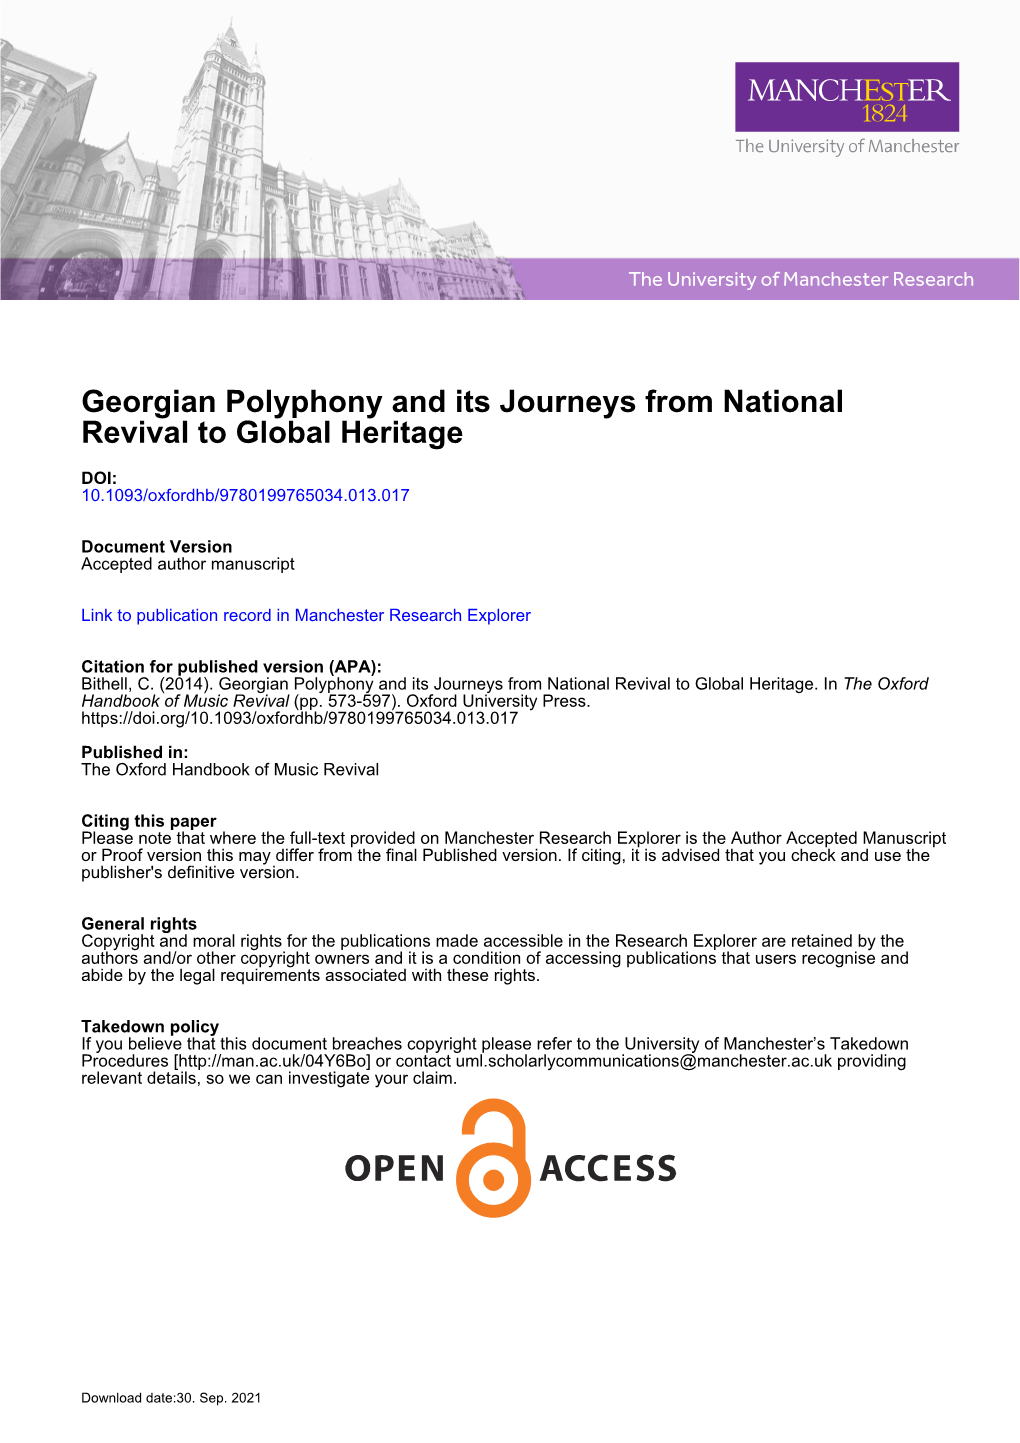 Georgian Polyphony and Its Journeys from National Revival to Global Heritage